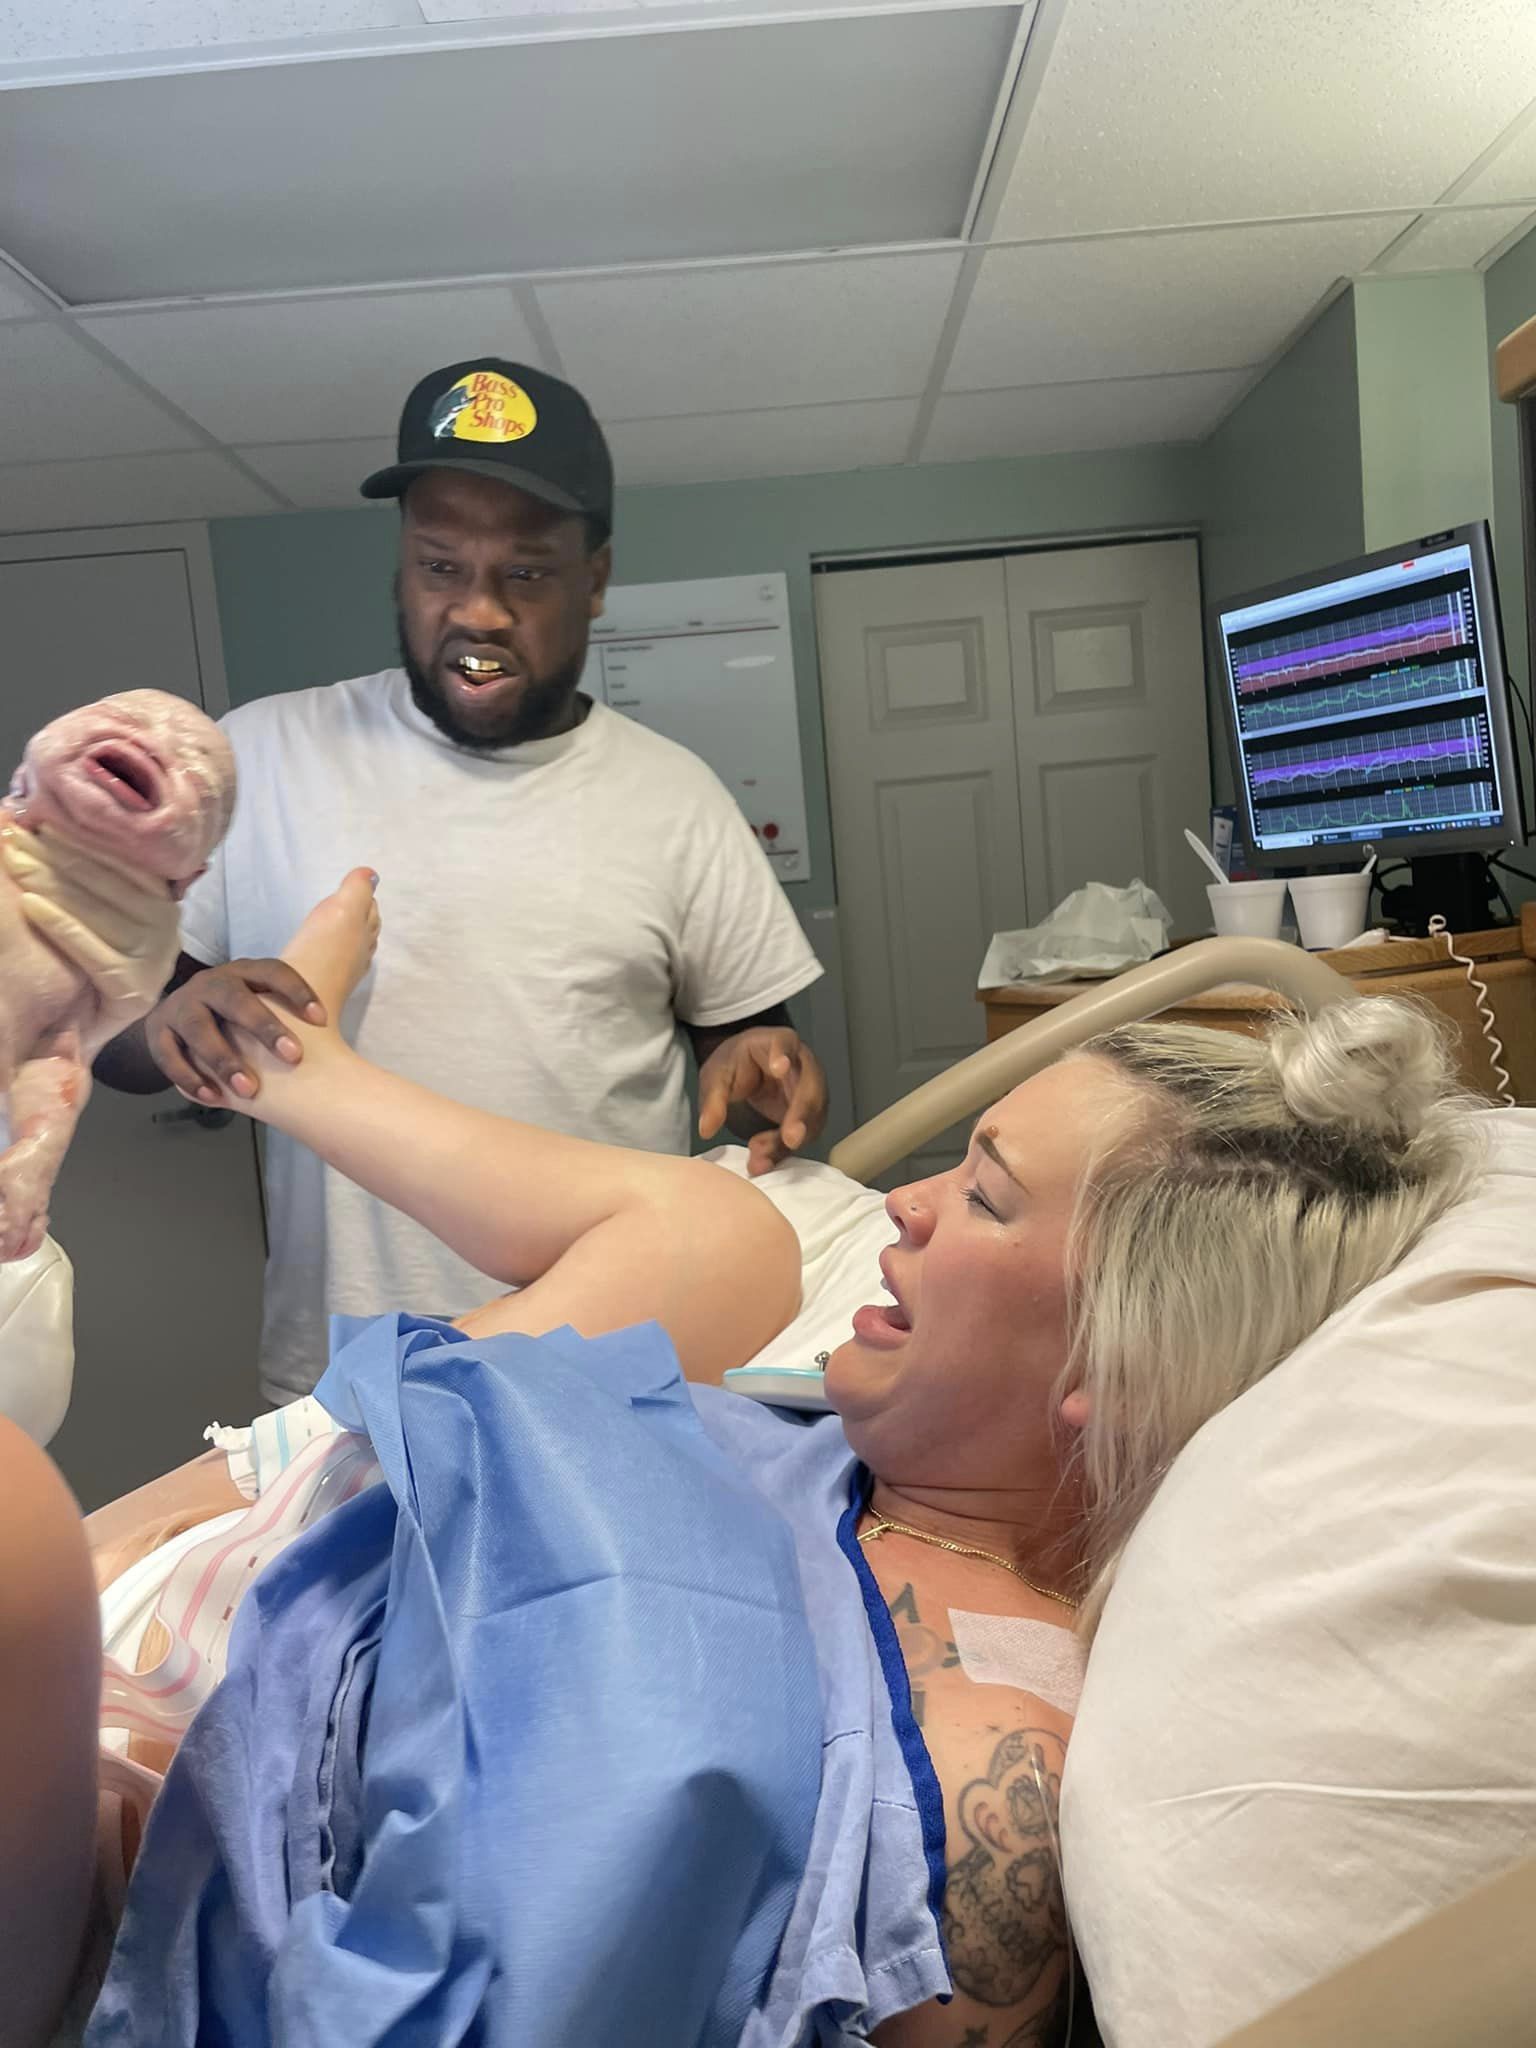 Dad undergoes labour simulation as a Mother's Day gift to his wife